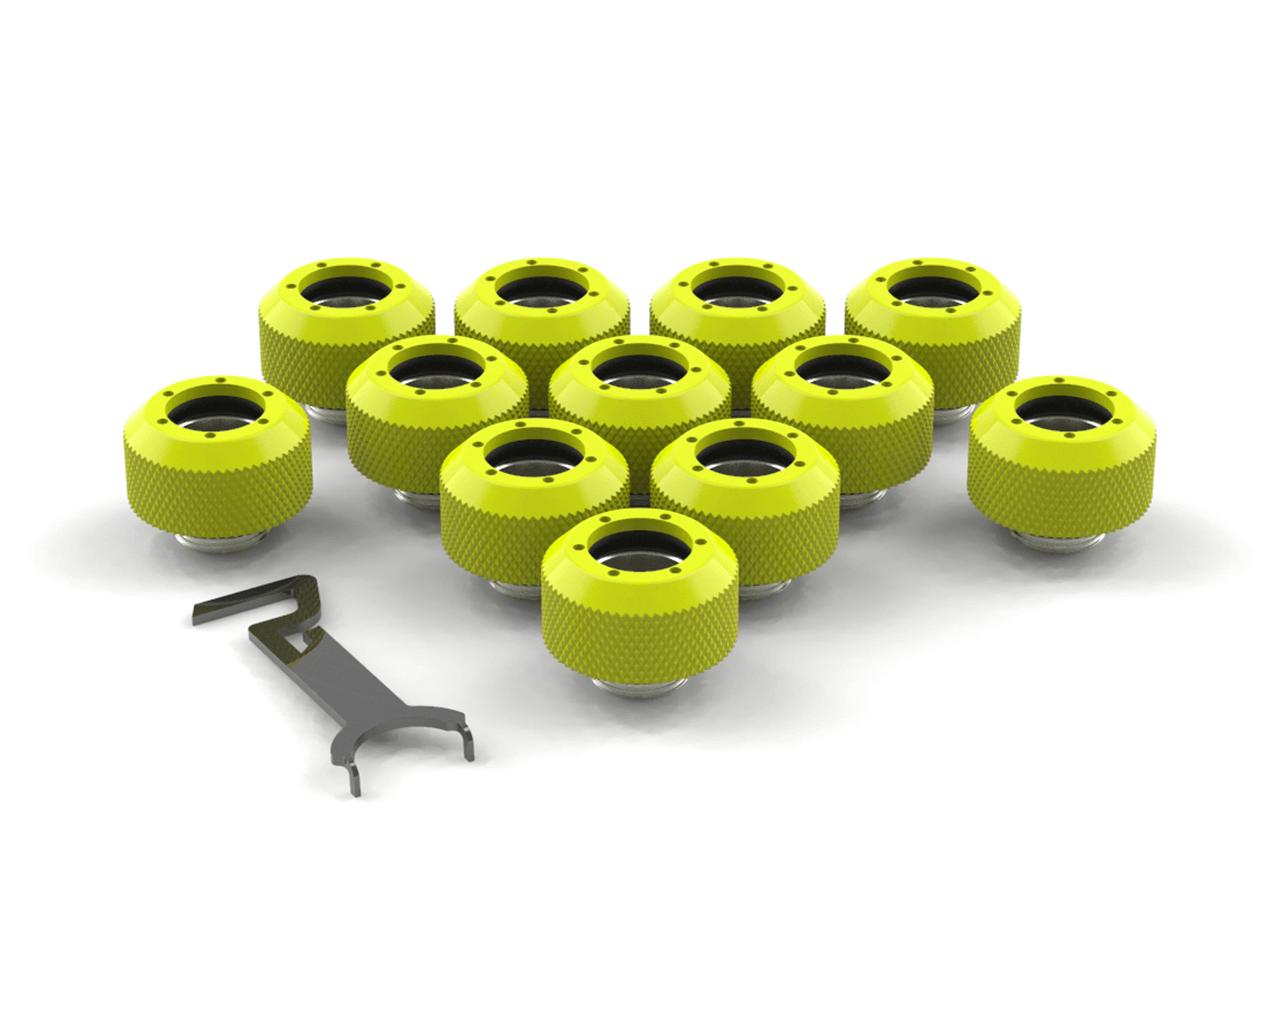 PrimoChill 1/2in. Rigid RevolverSX Series Fitting - 12 pack - PrimoChill - KEEPING IT COOL Lime Yellow